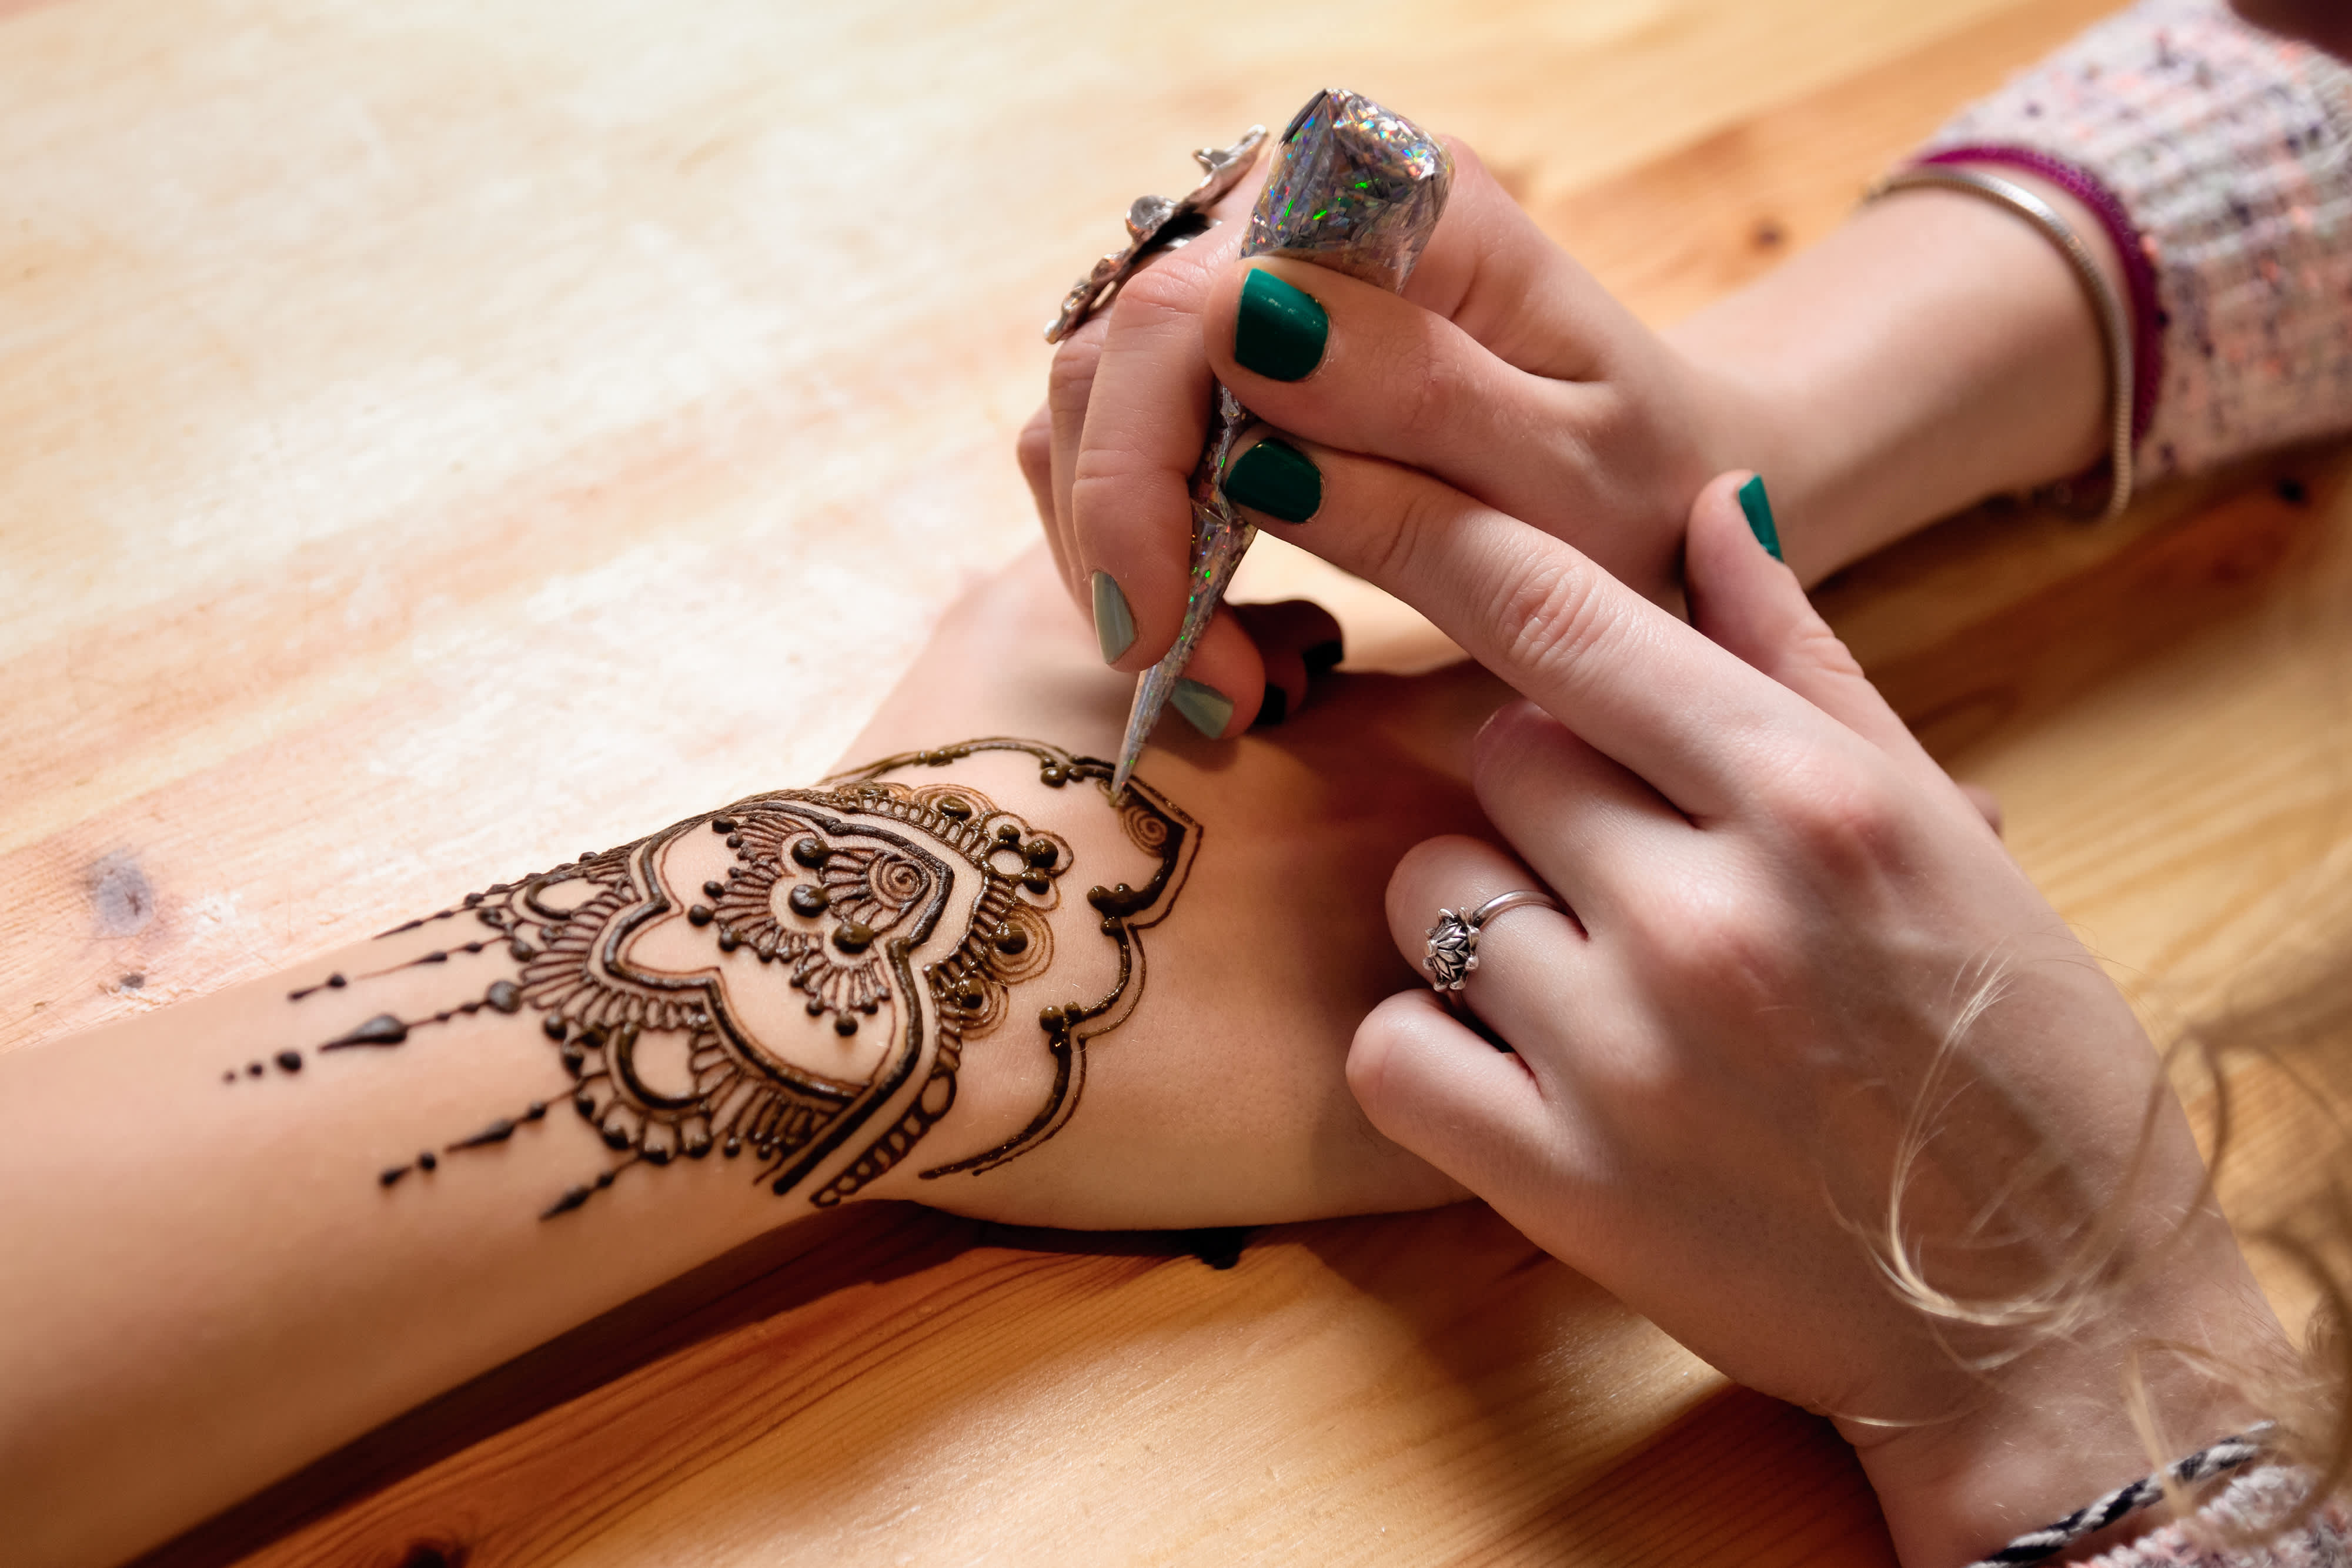 5-Minute Easy and Quick Mehndi Designs for Eid al-Fitr: Make Bracelet Henna  Patterns Around Your Wrists For The Eid Festival (Watch Video Tutorials) |  🙏🏻 LatestLY